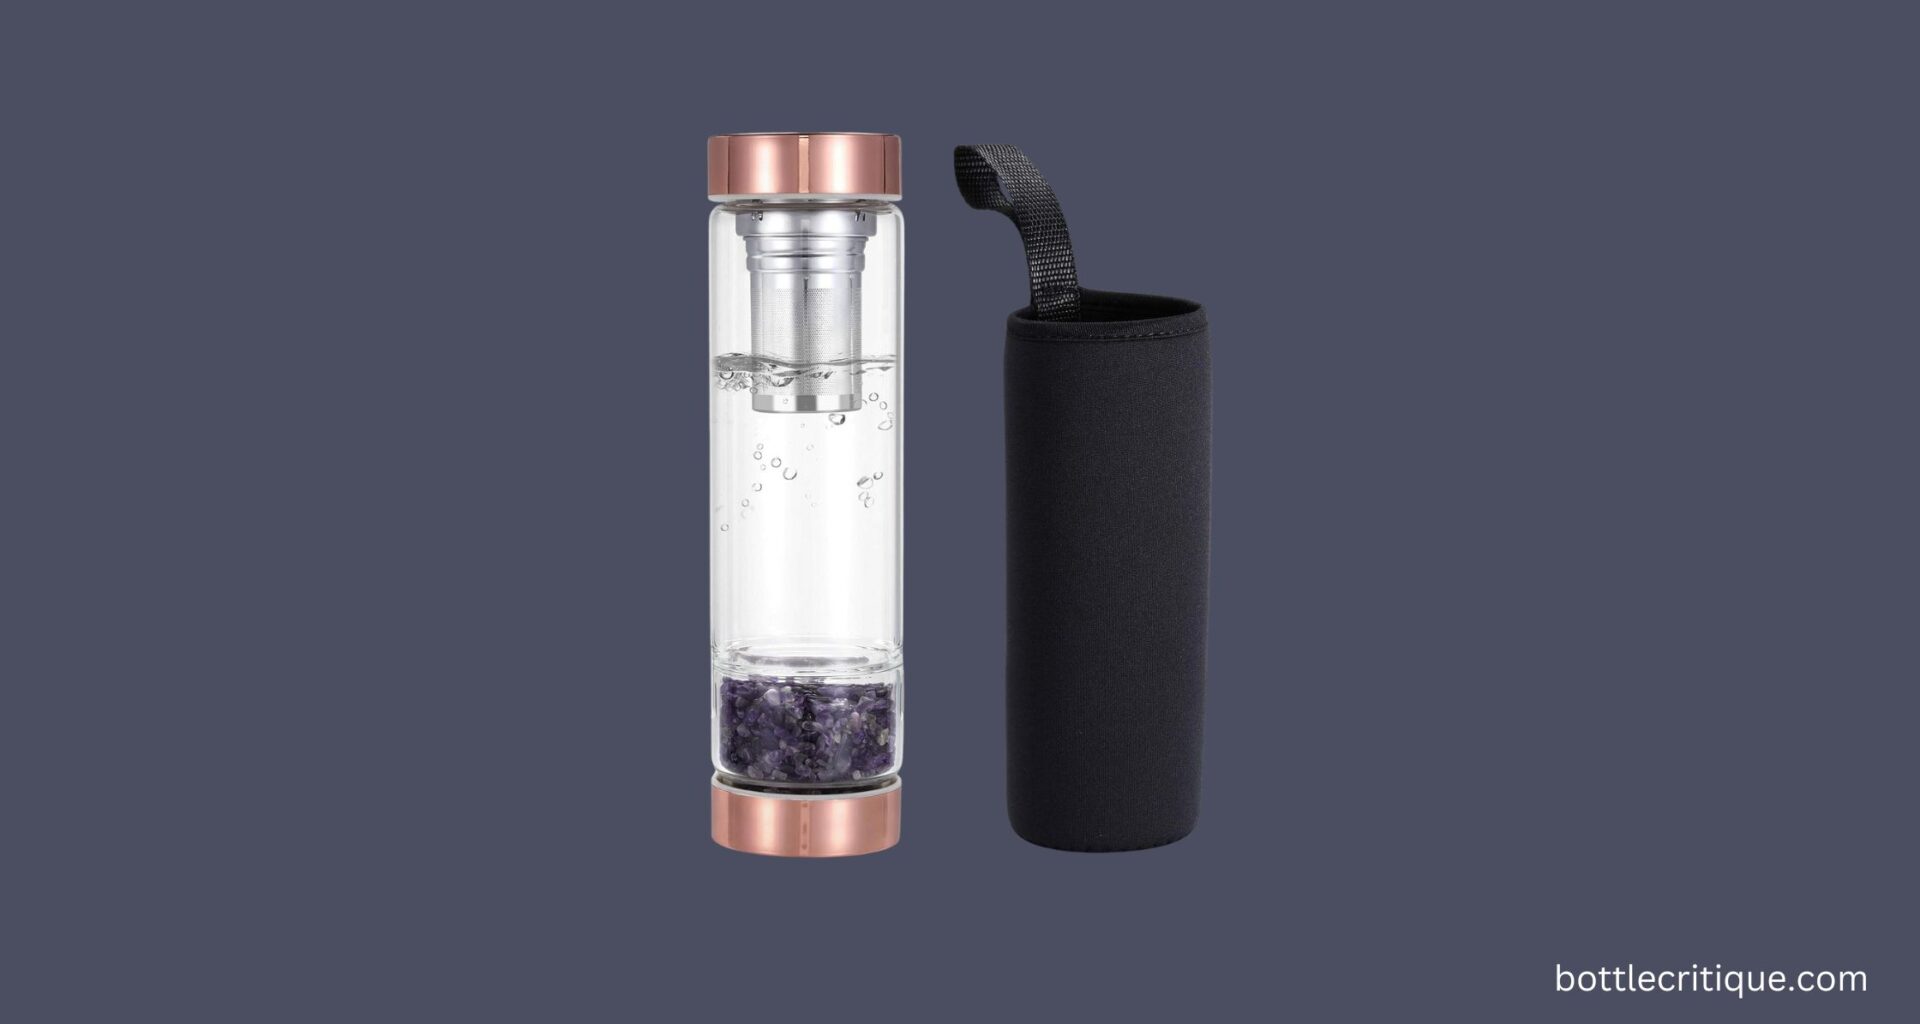 How to Use Tea Infuser Water Bottle?